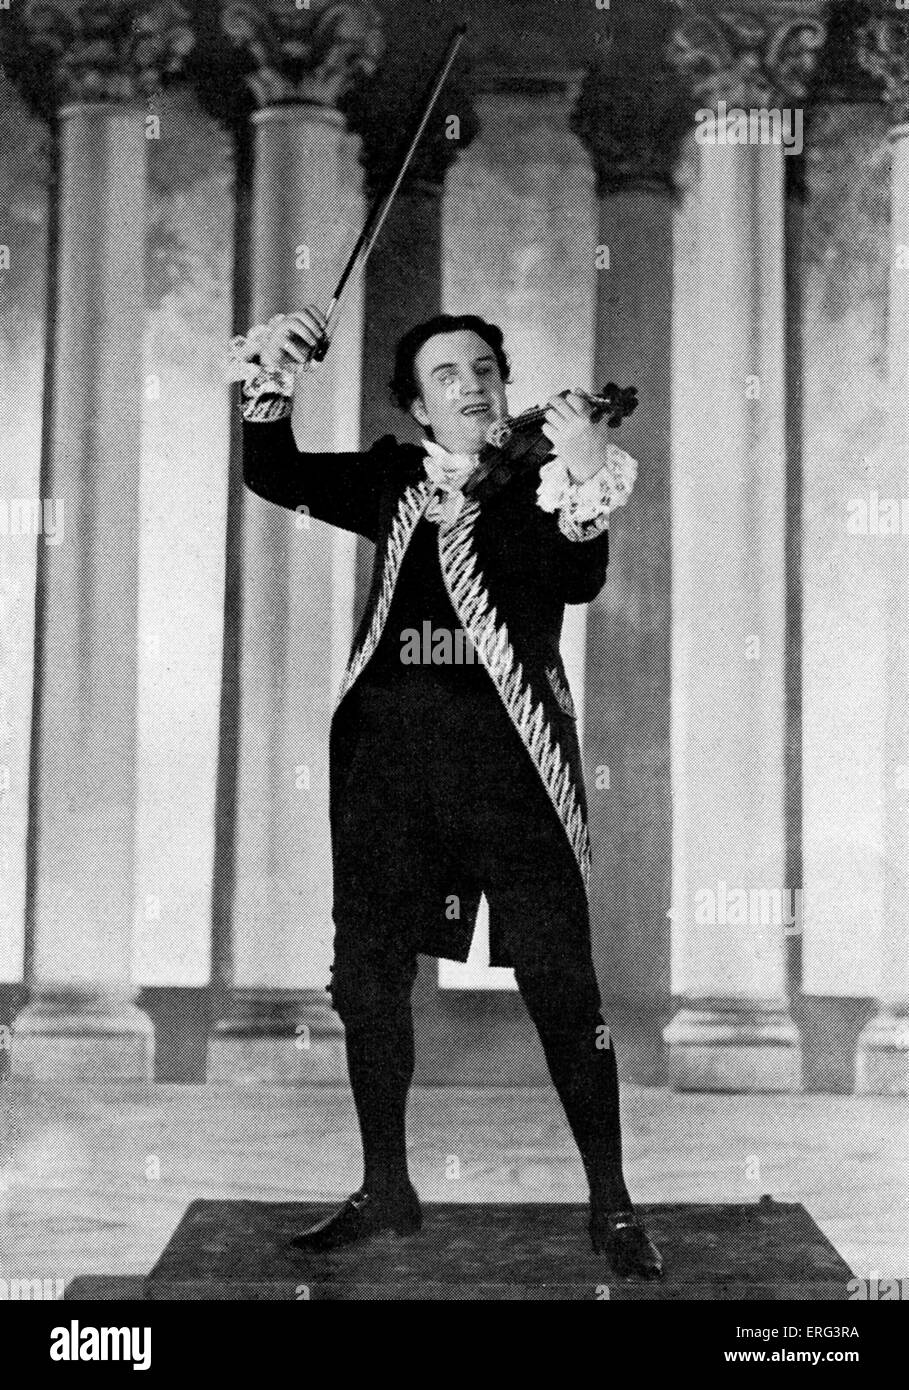 Richard Tauber as Paganini, in an operetta based on the life of the violinist and composer, by Paul Knepler and Bela Jenbach. Stock Photo